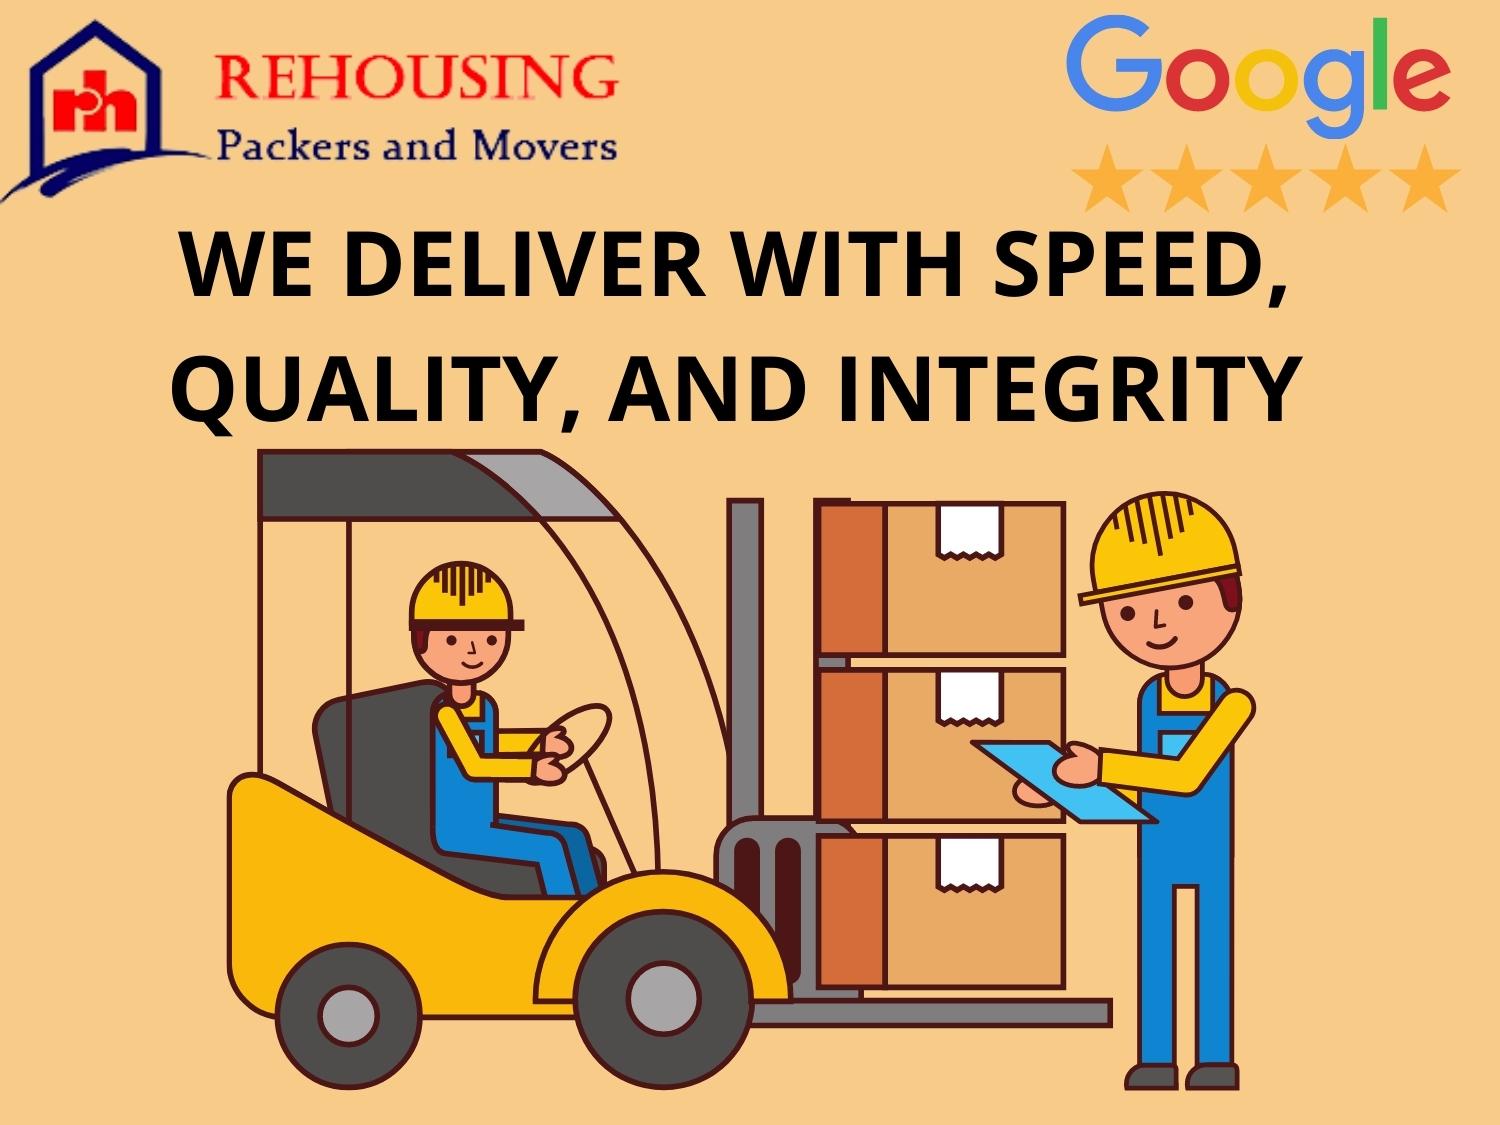 Courier services from Surat to Vadodara is dependable and secure, but they do not meet your desire for immediate delivery